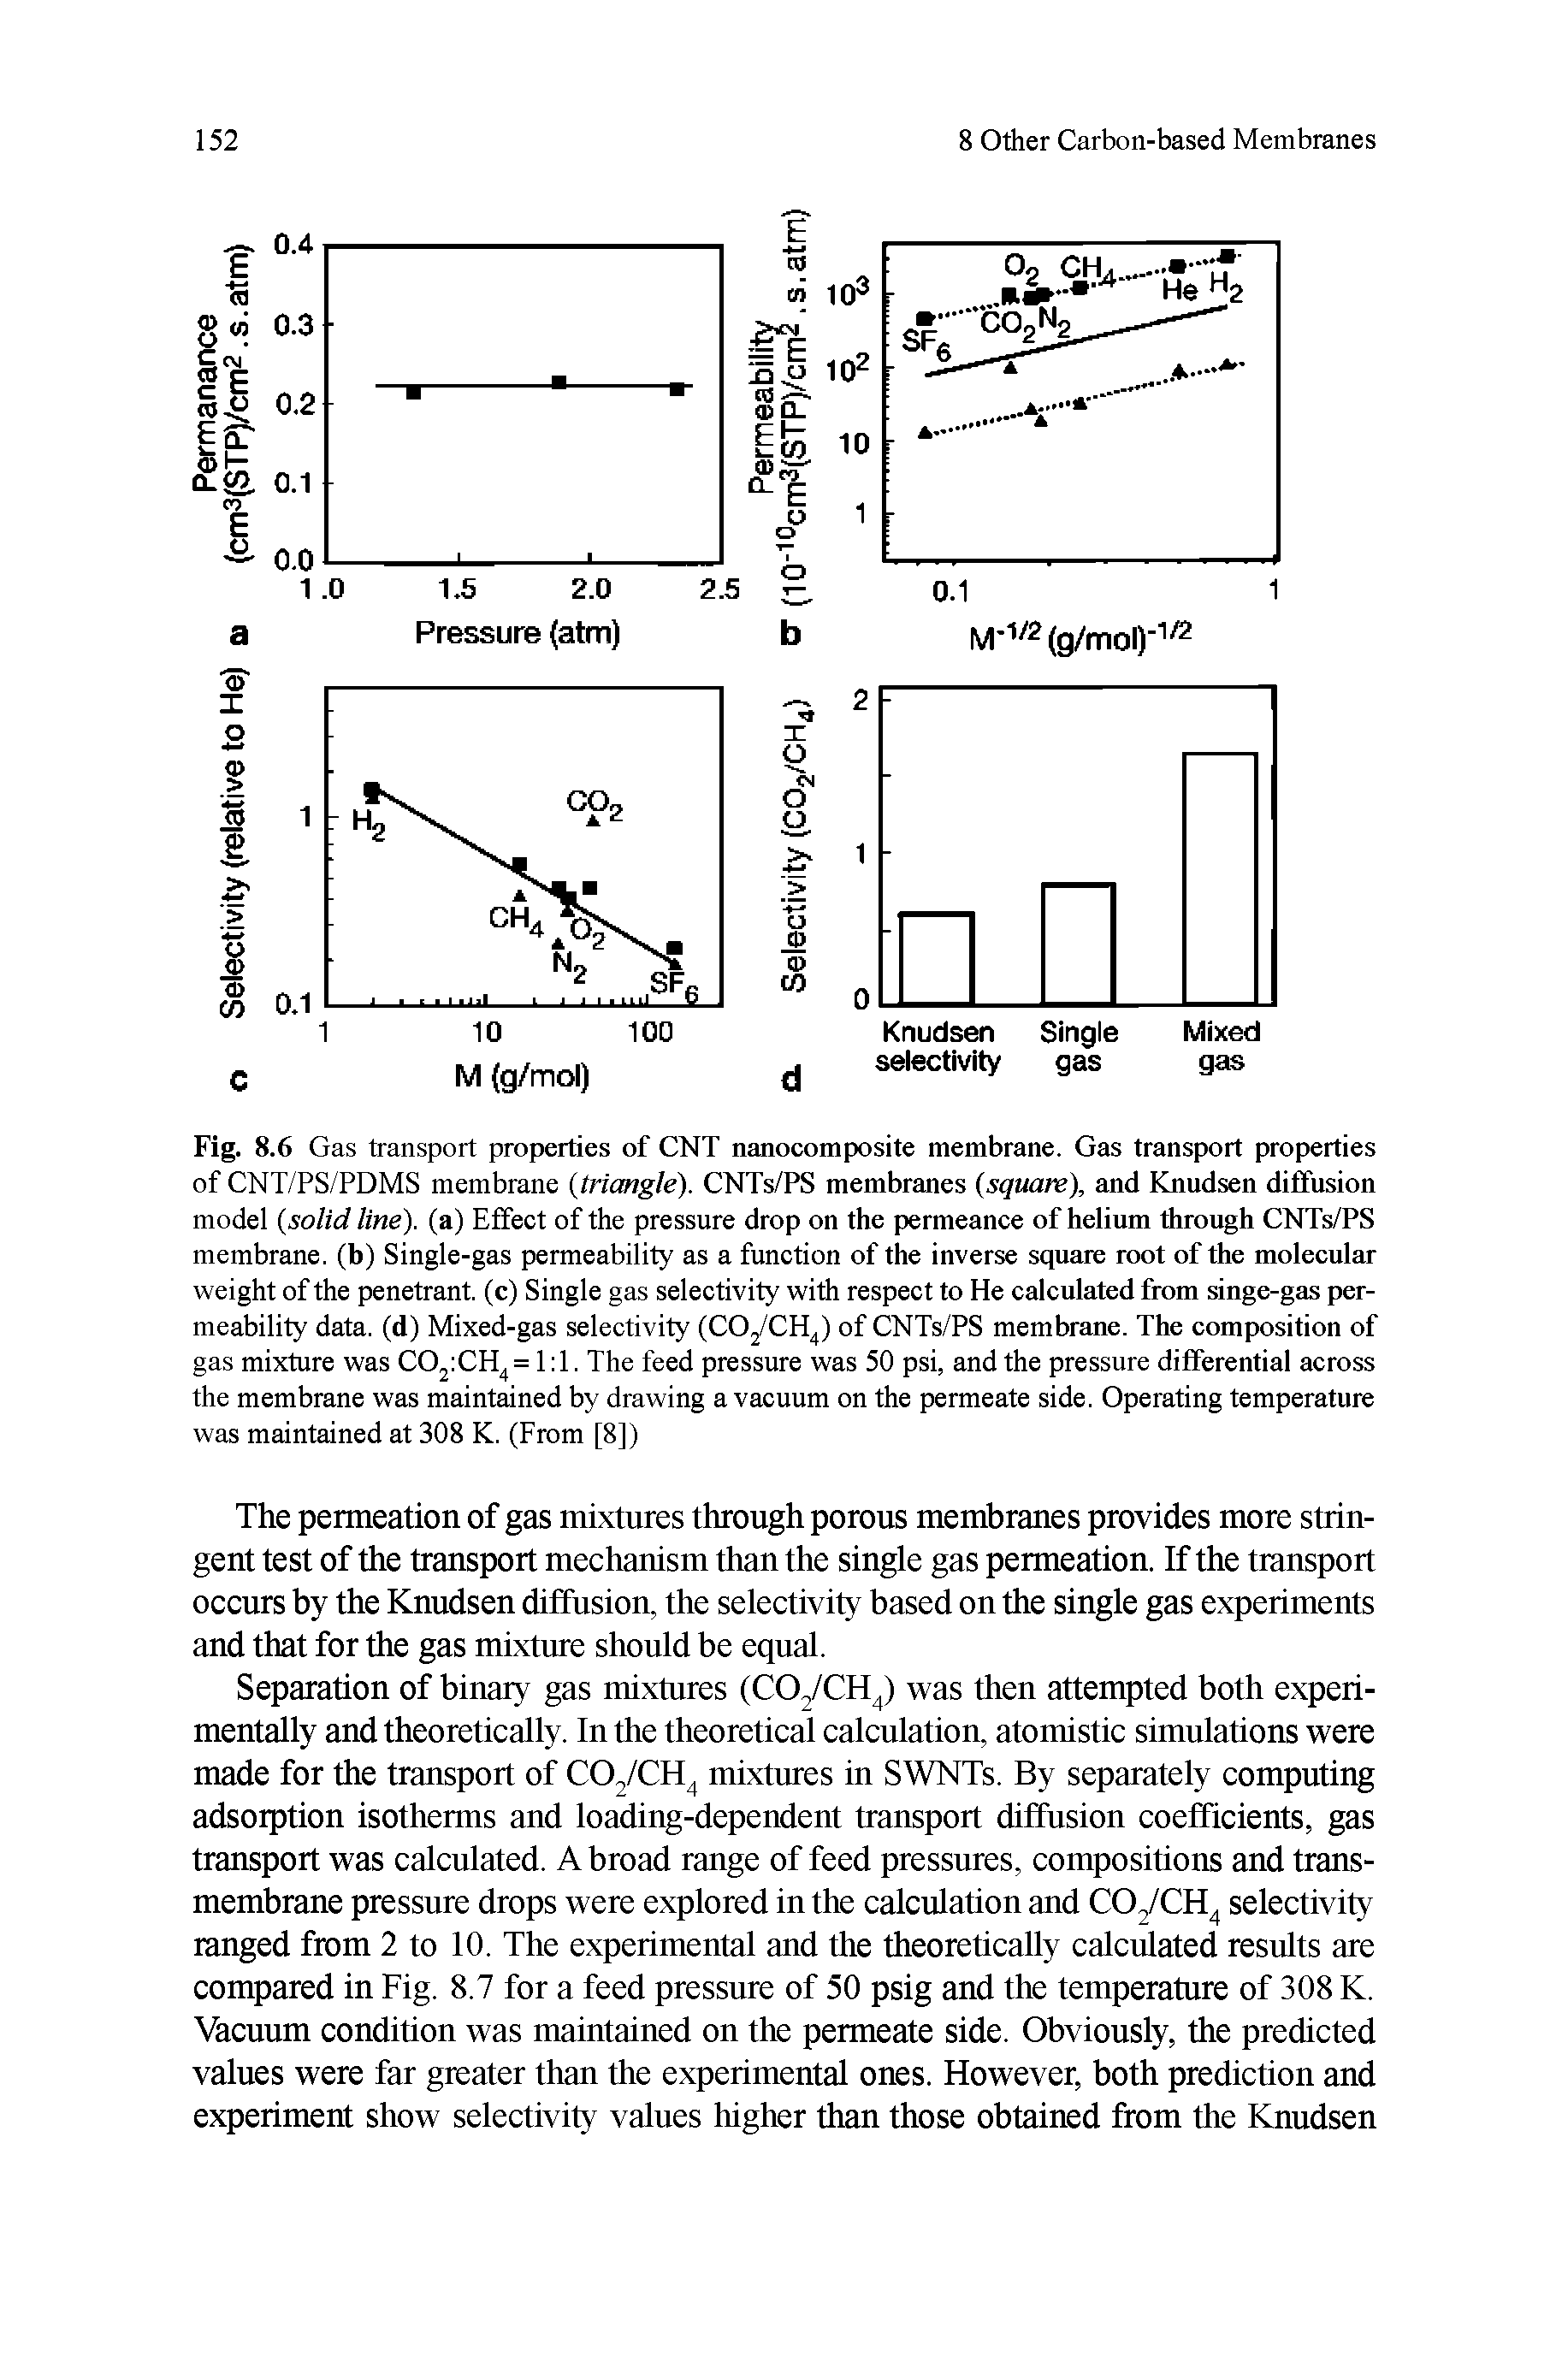 Fig. 8.6 Gas transport properties of CNT nanocomposite membrane. Gas transport properties of CNT/PS/PDMS membrane (triangle). CNTs/PS membranes (square), and Knudsen diffusion model (solid line), (a) Effeet of the pressure drop on the permeance of helium through CNTs/PS membrane, (b) Single-gas permeability as a funetion of the inverse square root of the molecular weight of the penetrant, (c) Single gas seleetivity with respect to He calculated from singe-gas permeability data, (d) Mixed-gas selectivity (CO /CH ) of CNTs/PS membrane. The composition of gas mixture was COjiCH =1 1. The feed pressure was 50 psi, and the pressure differential across the membrane was maintained by drawing a vaeuum on the permeate side. Operating temperature was maintained at 308 K. (From [8])...